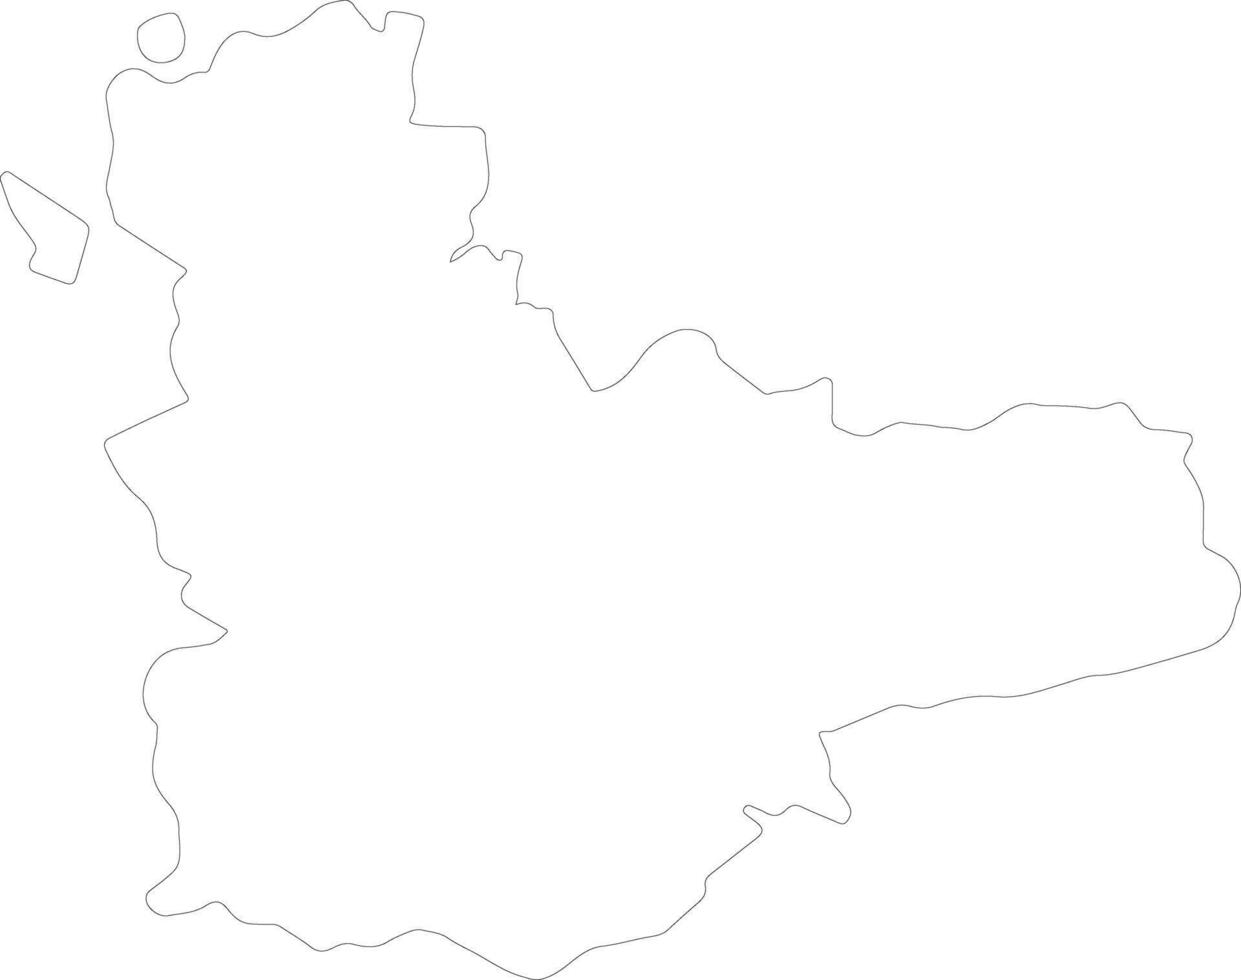 Valladolid Spain outline map vector